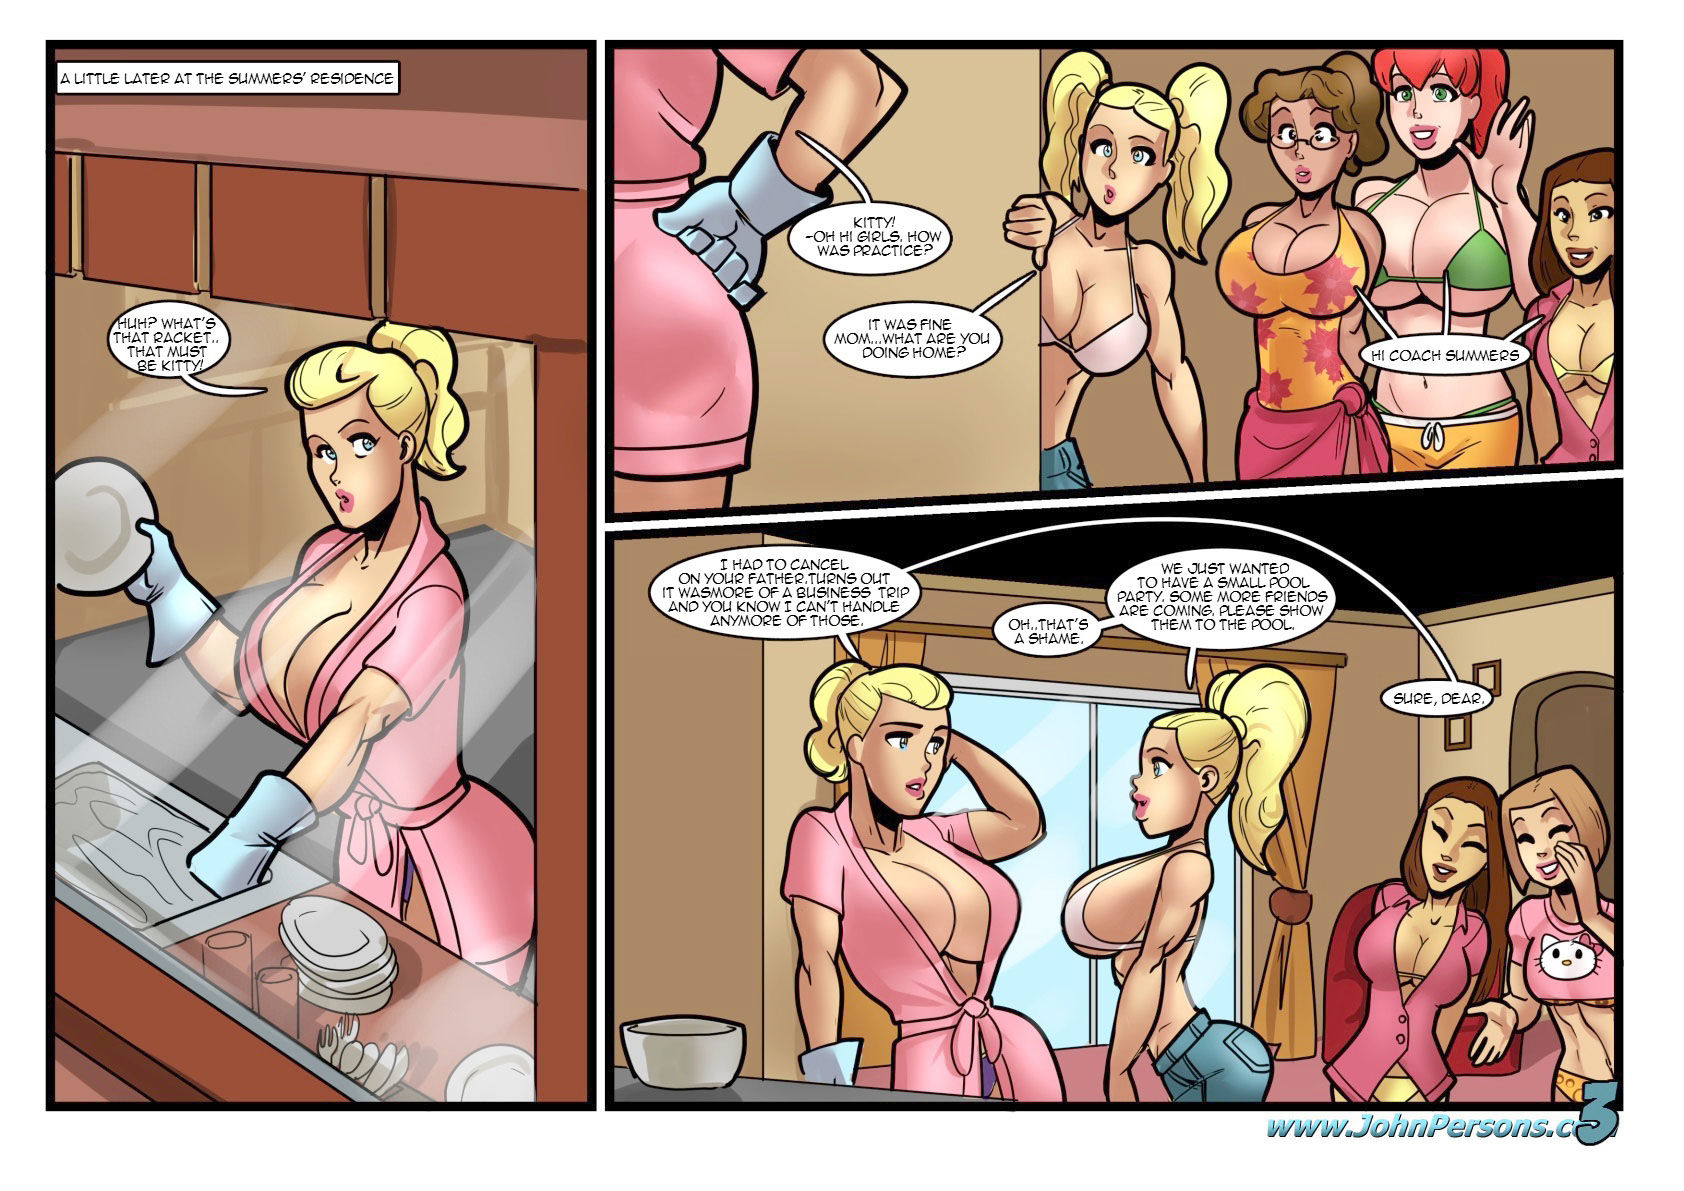 Pool Party Prologue - John Persons page 10